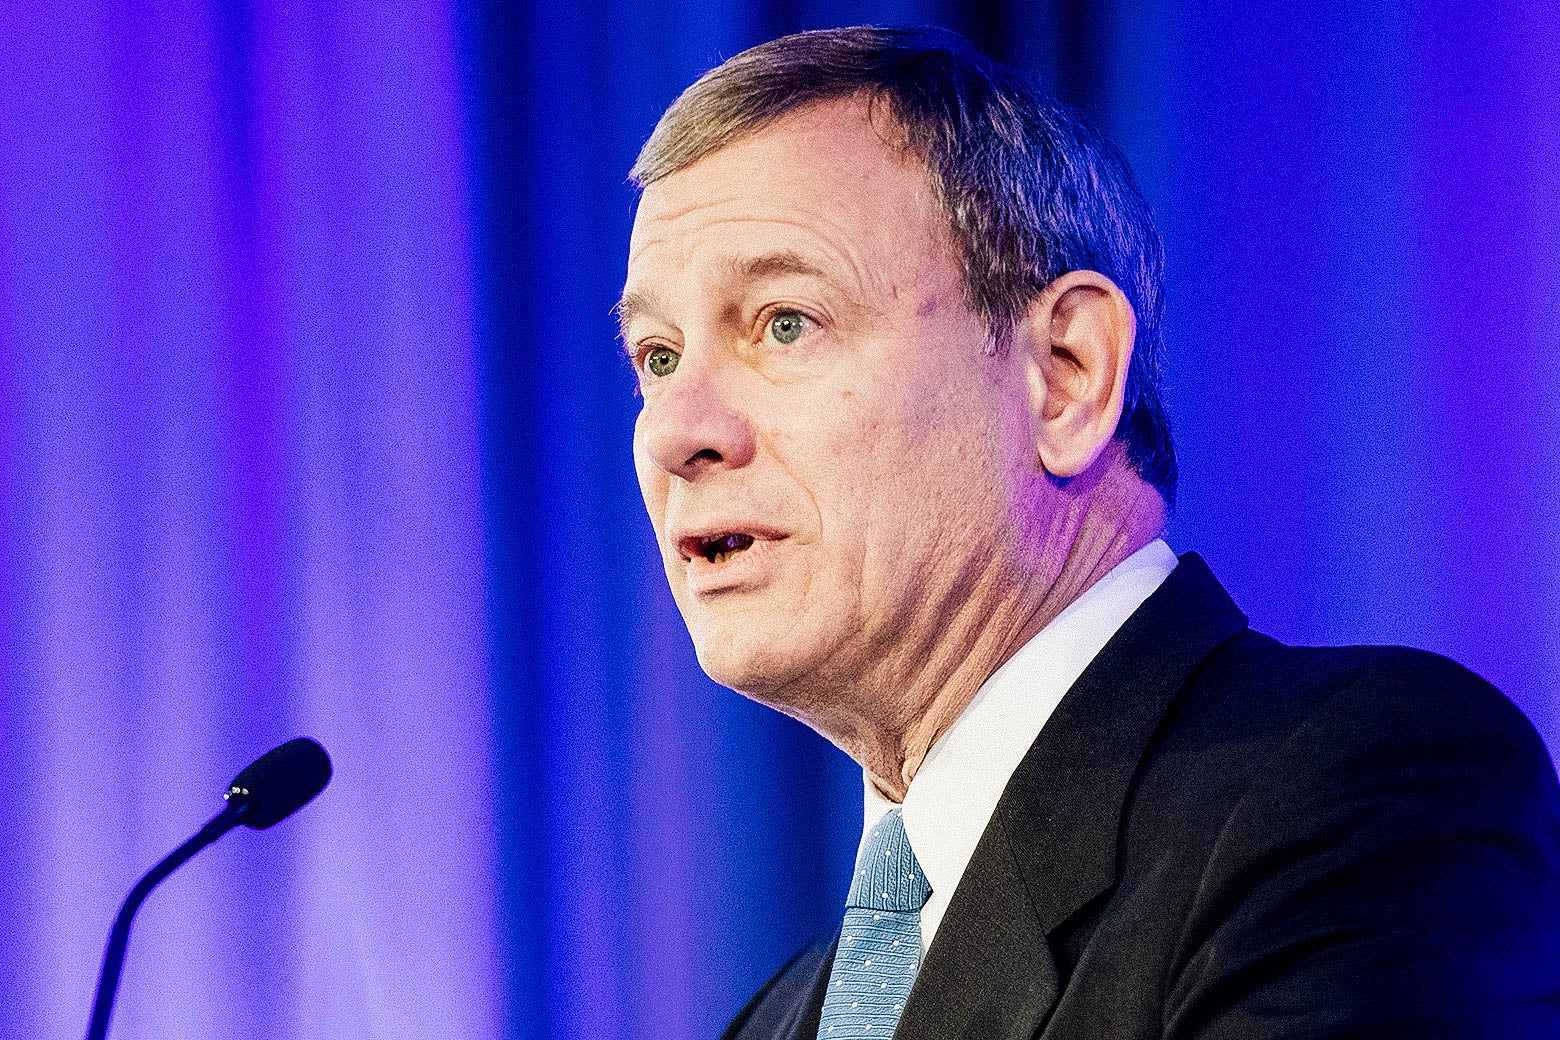 US Supreme Court Chief Justice John Roberts speaks before presenting US Supreme Court Justice Ruth Bader Ginsburg the American Law Institute’s Henry J. Friendly Medal in Washington, DC, on May 14, 2018.